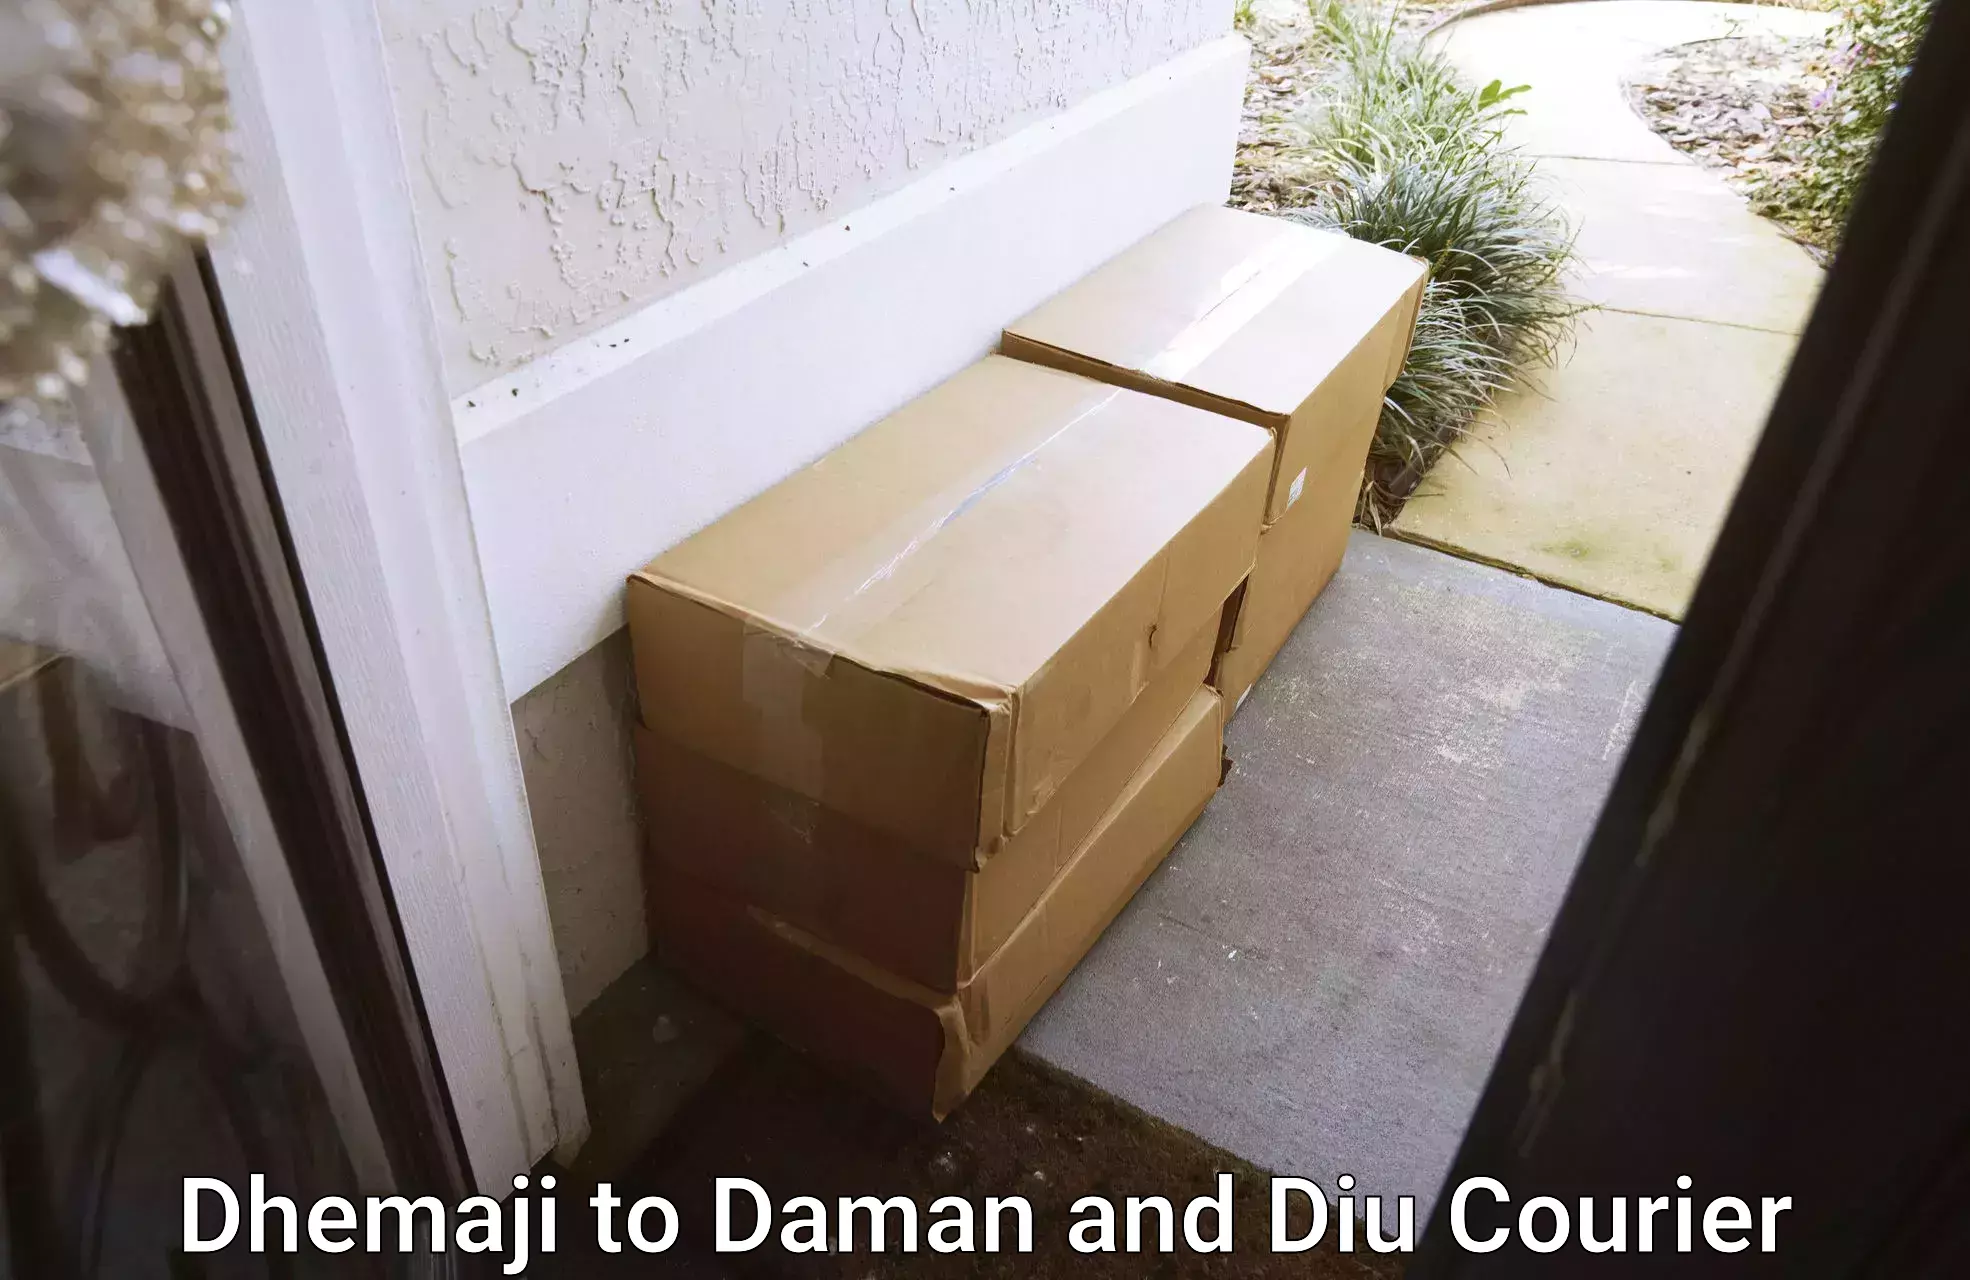 Courier dispatch services Dhemaji to Daman and Diu